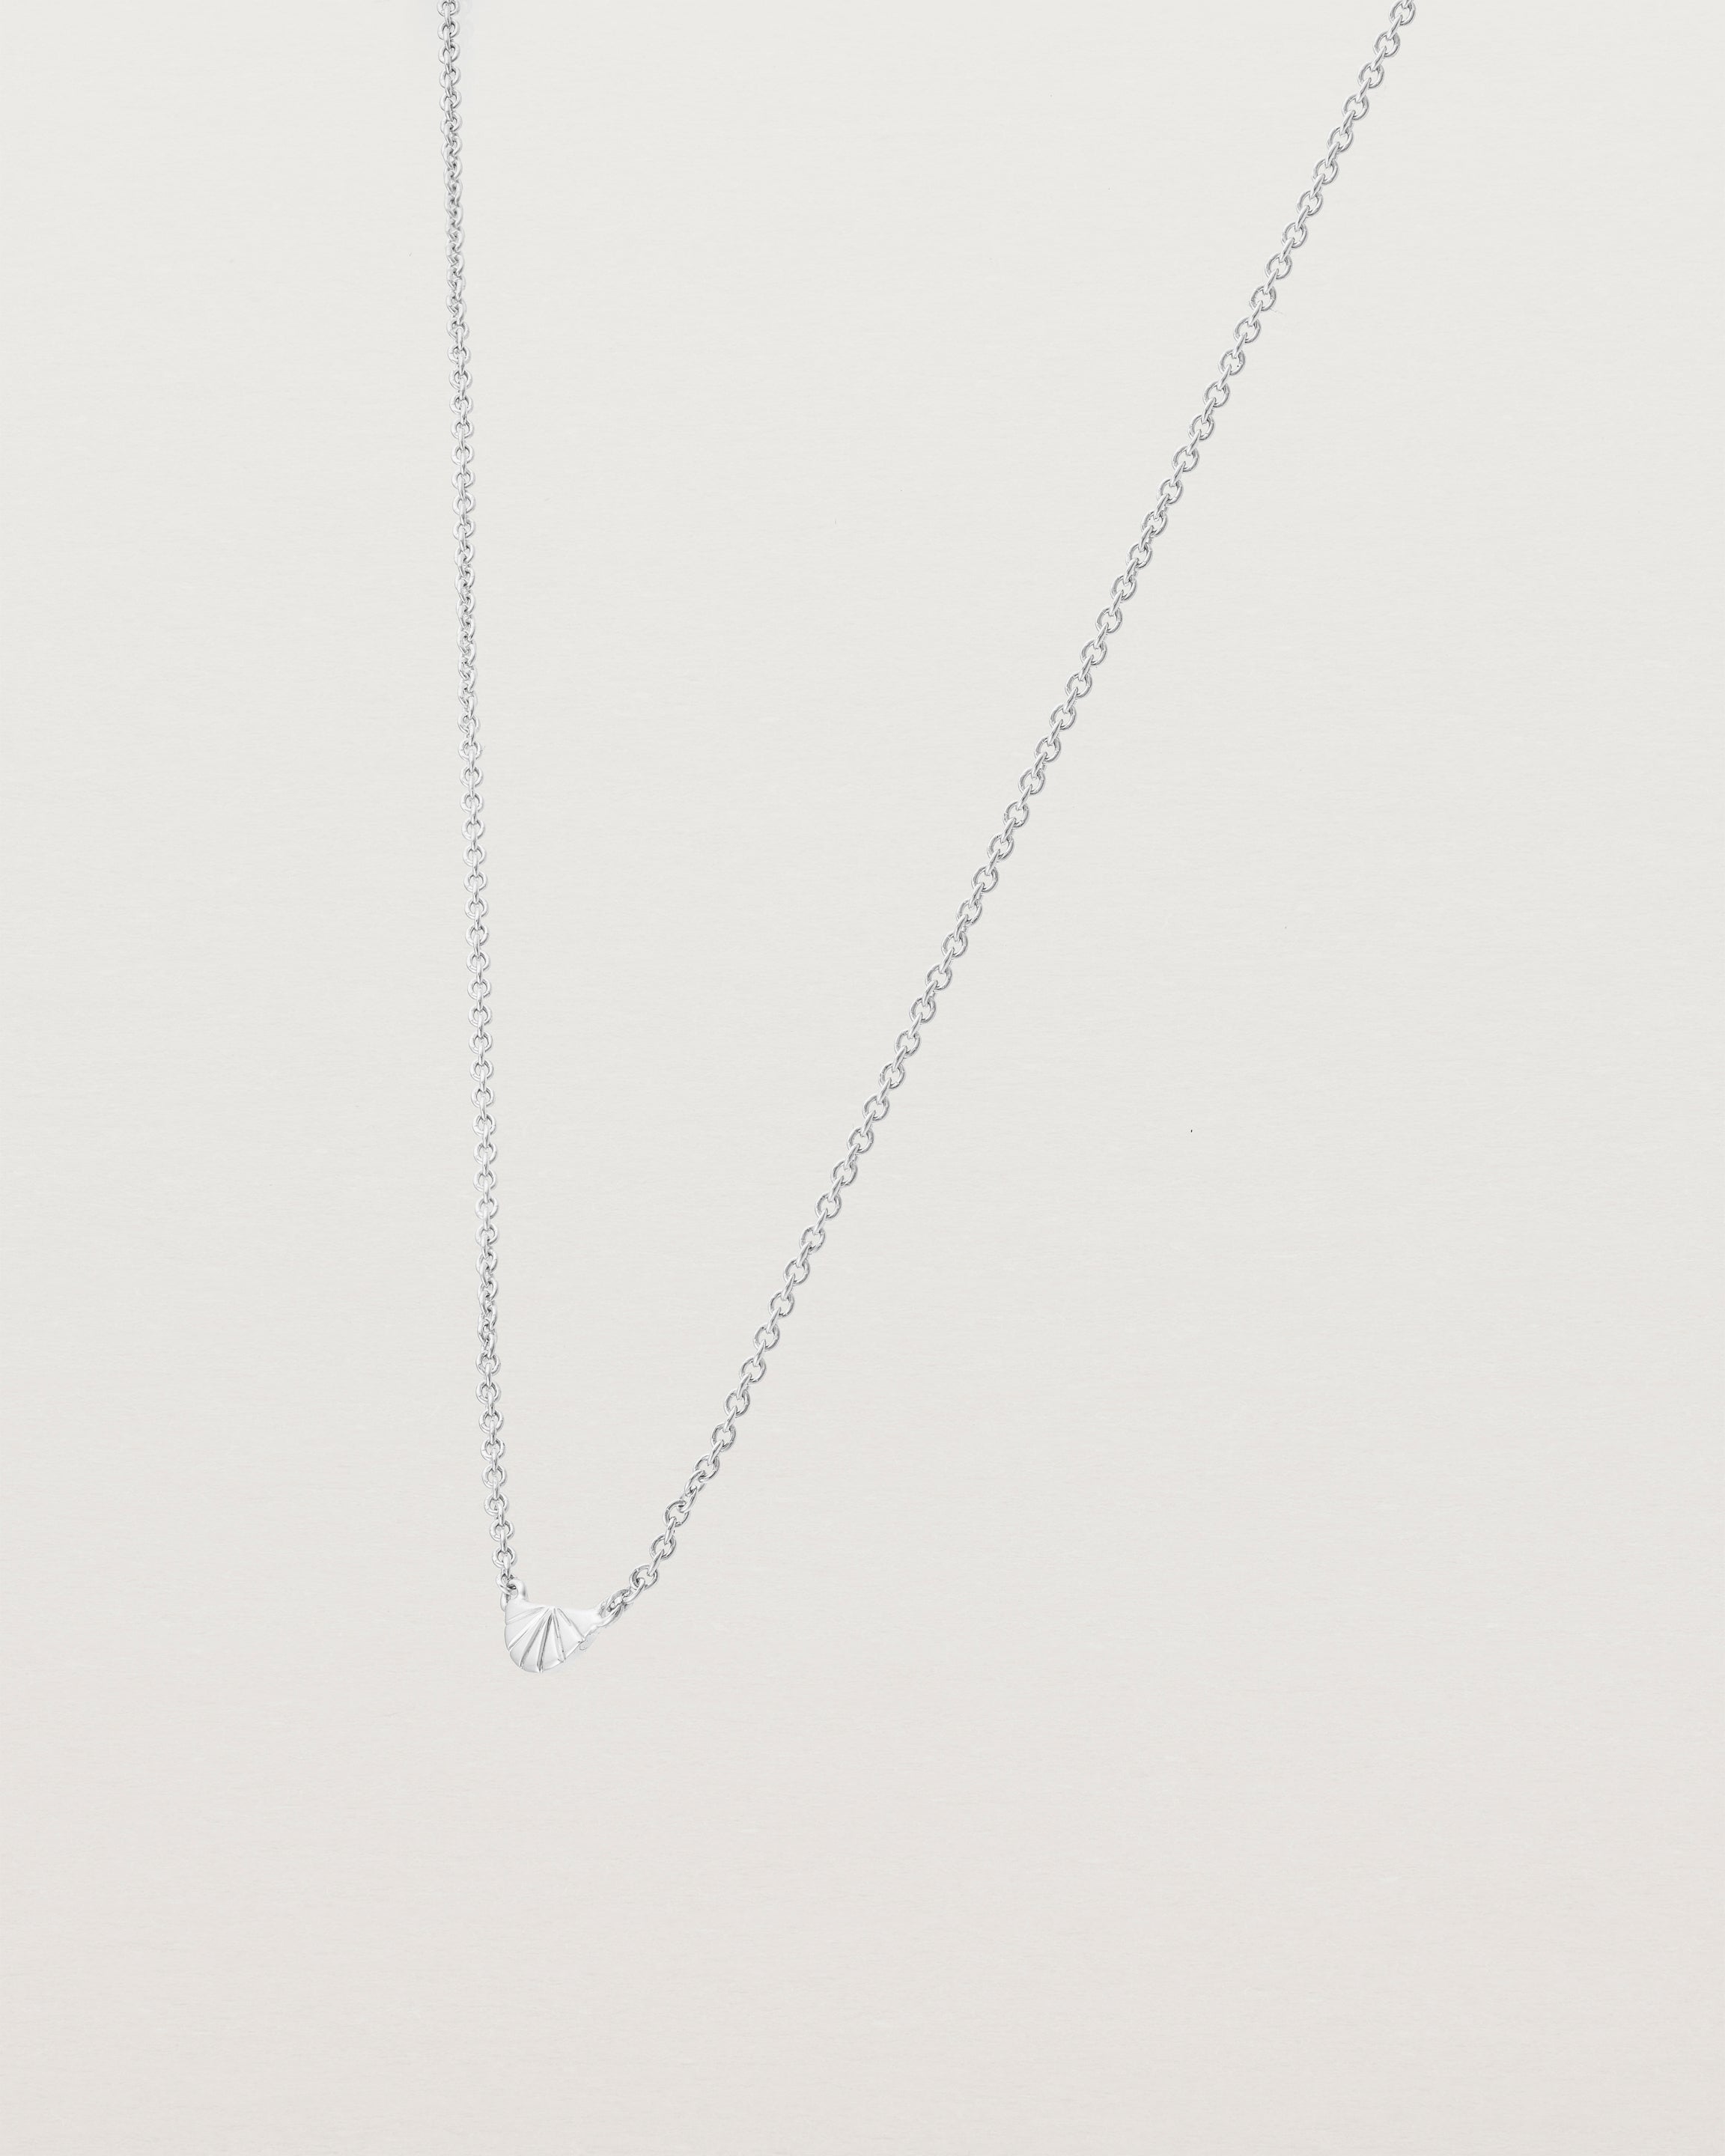 Angled view of the Jia Necklace in Sterling Silver.